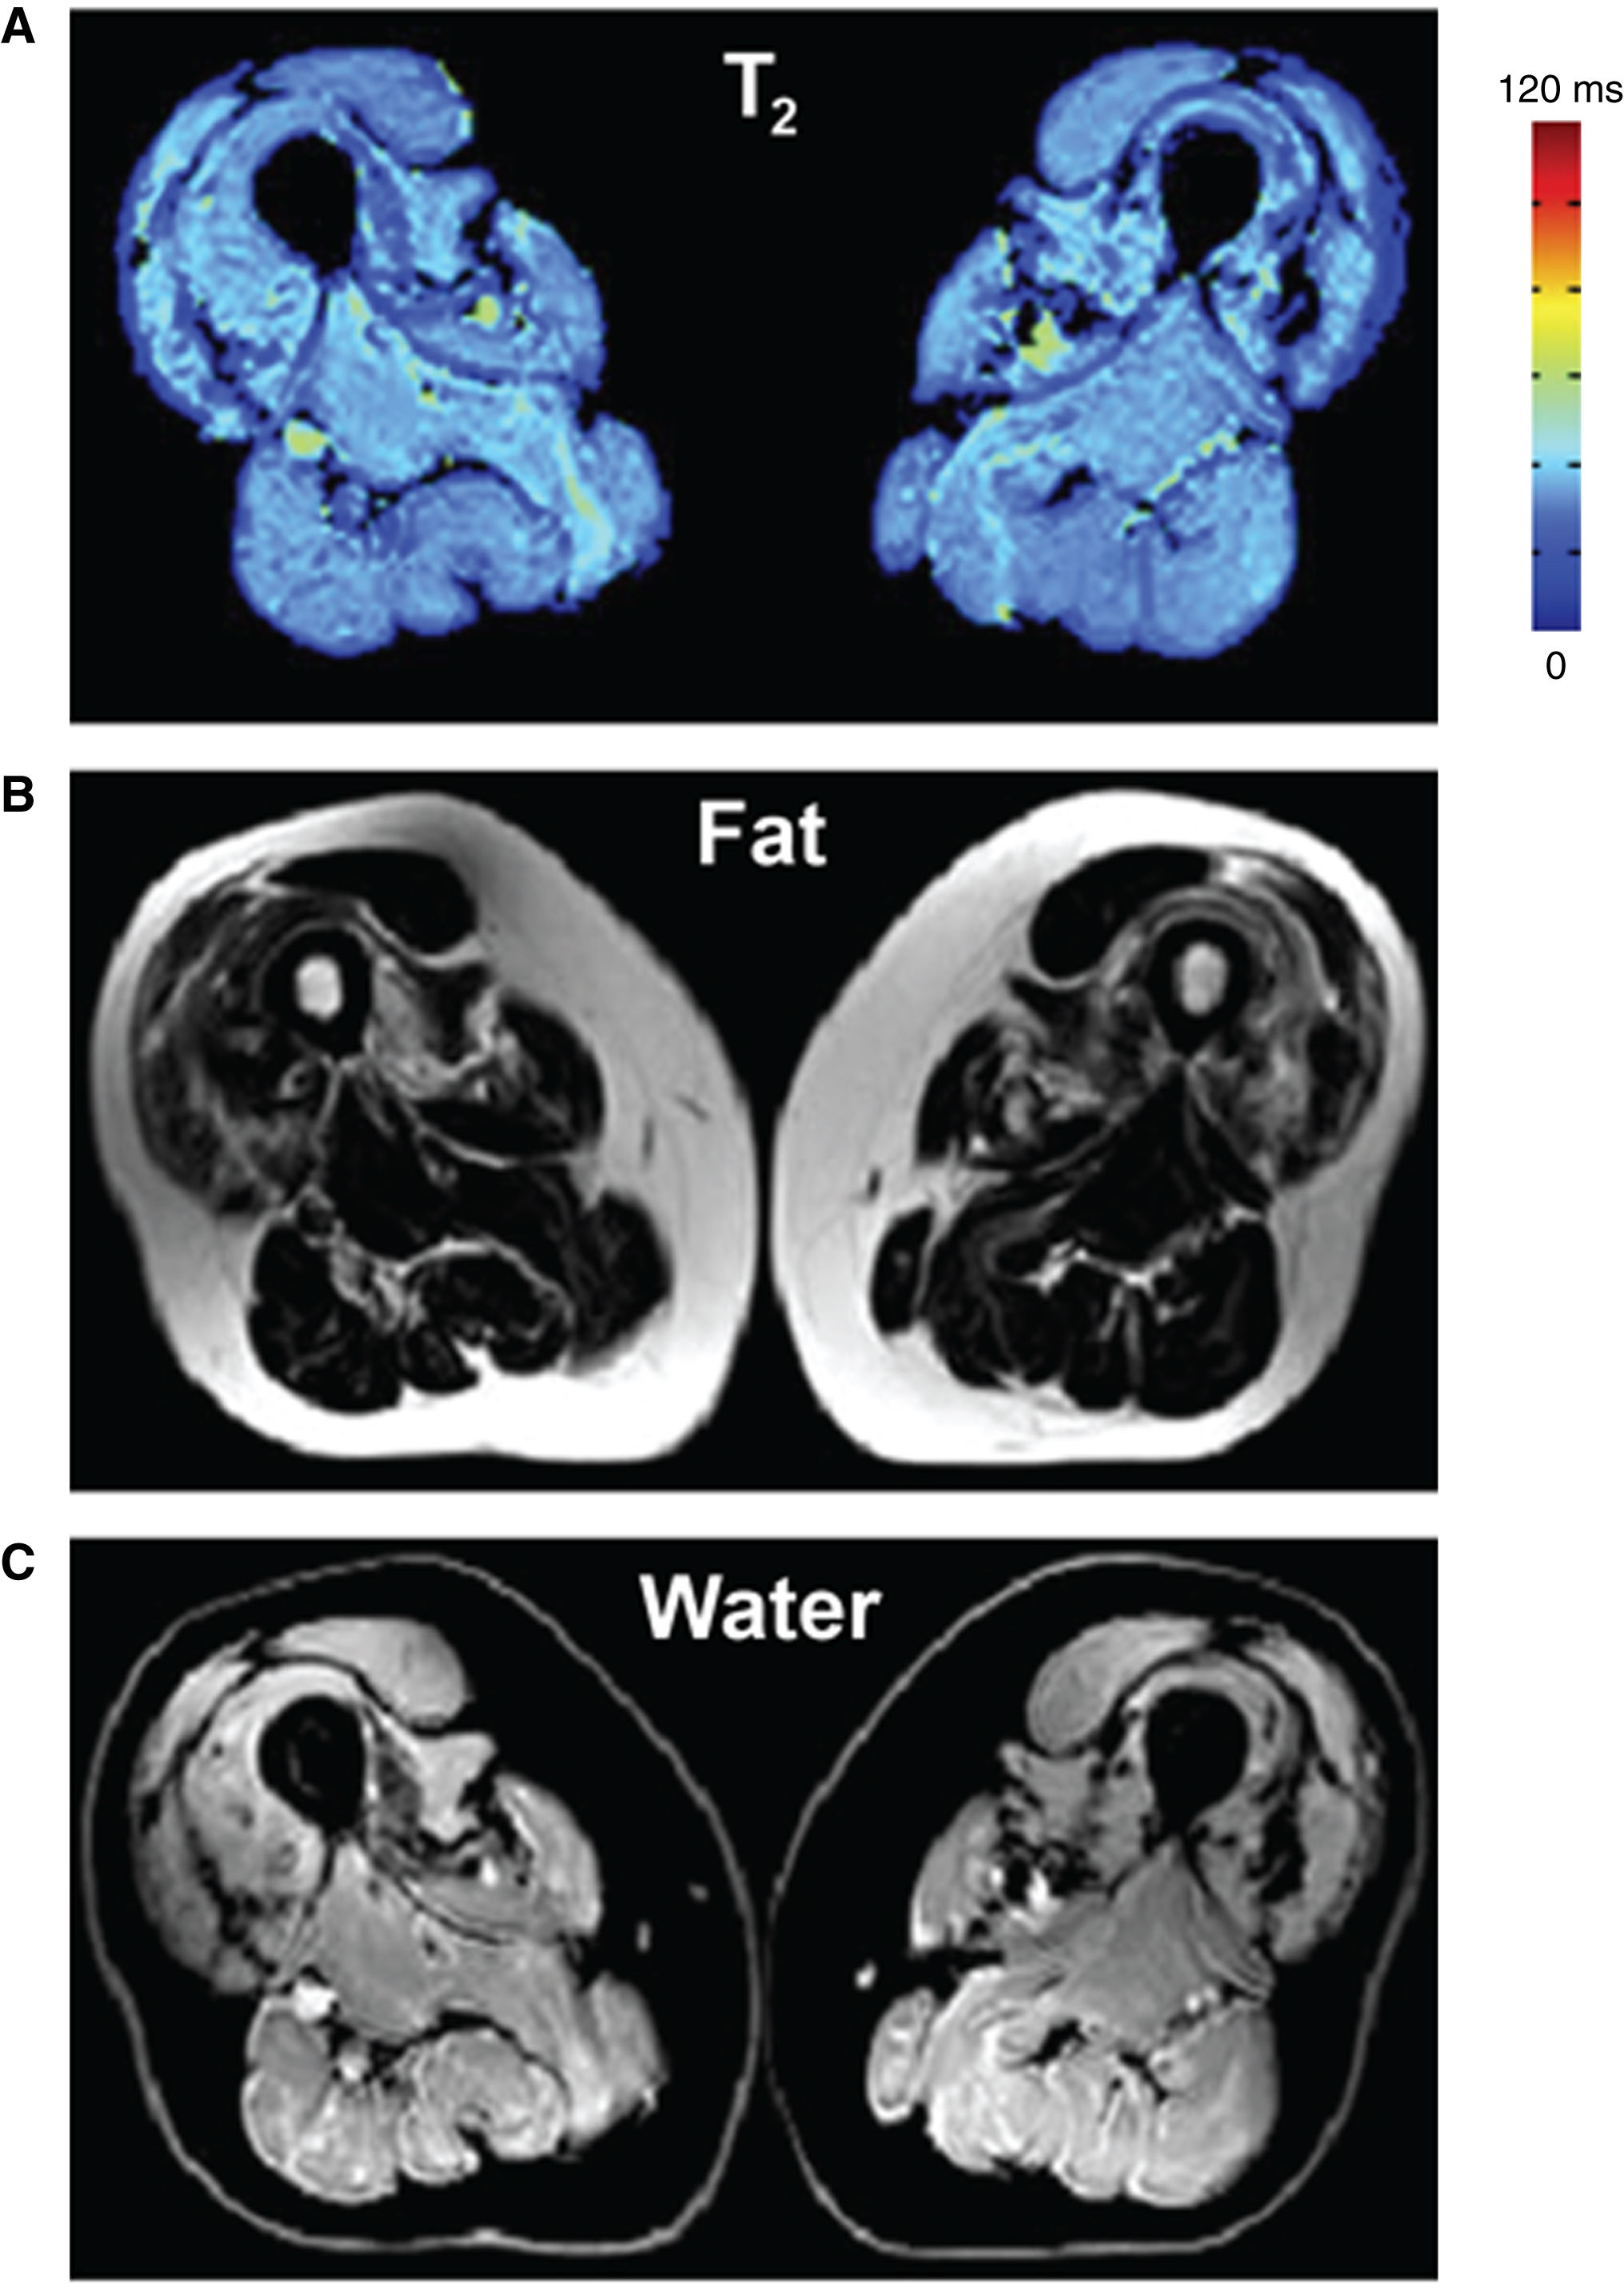 Bi-component extended phase graph (EPG) approach to simultaneously quantify the muscle water T2 and fat fraction. (A) Water T2 map. (B) Fat image. (C) Water image. Figure adapted from Marty et al. with permission [32].